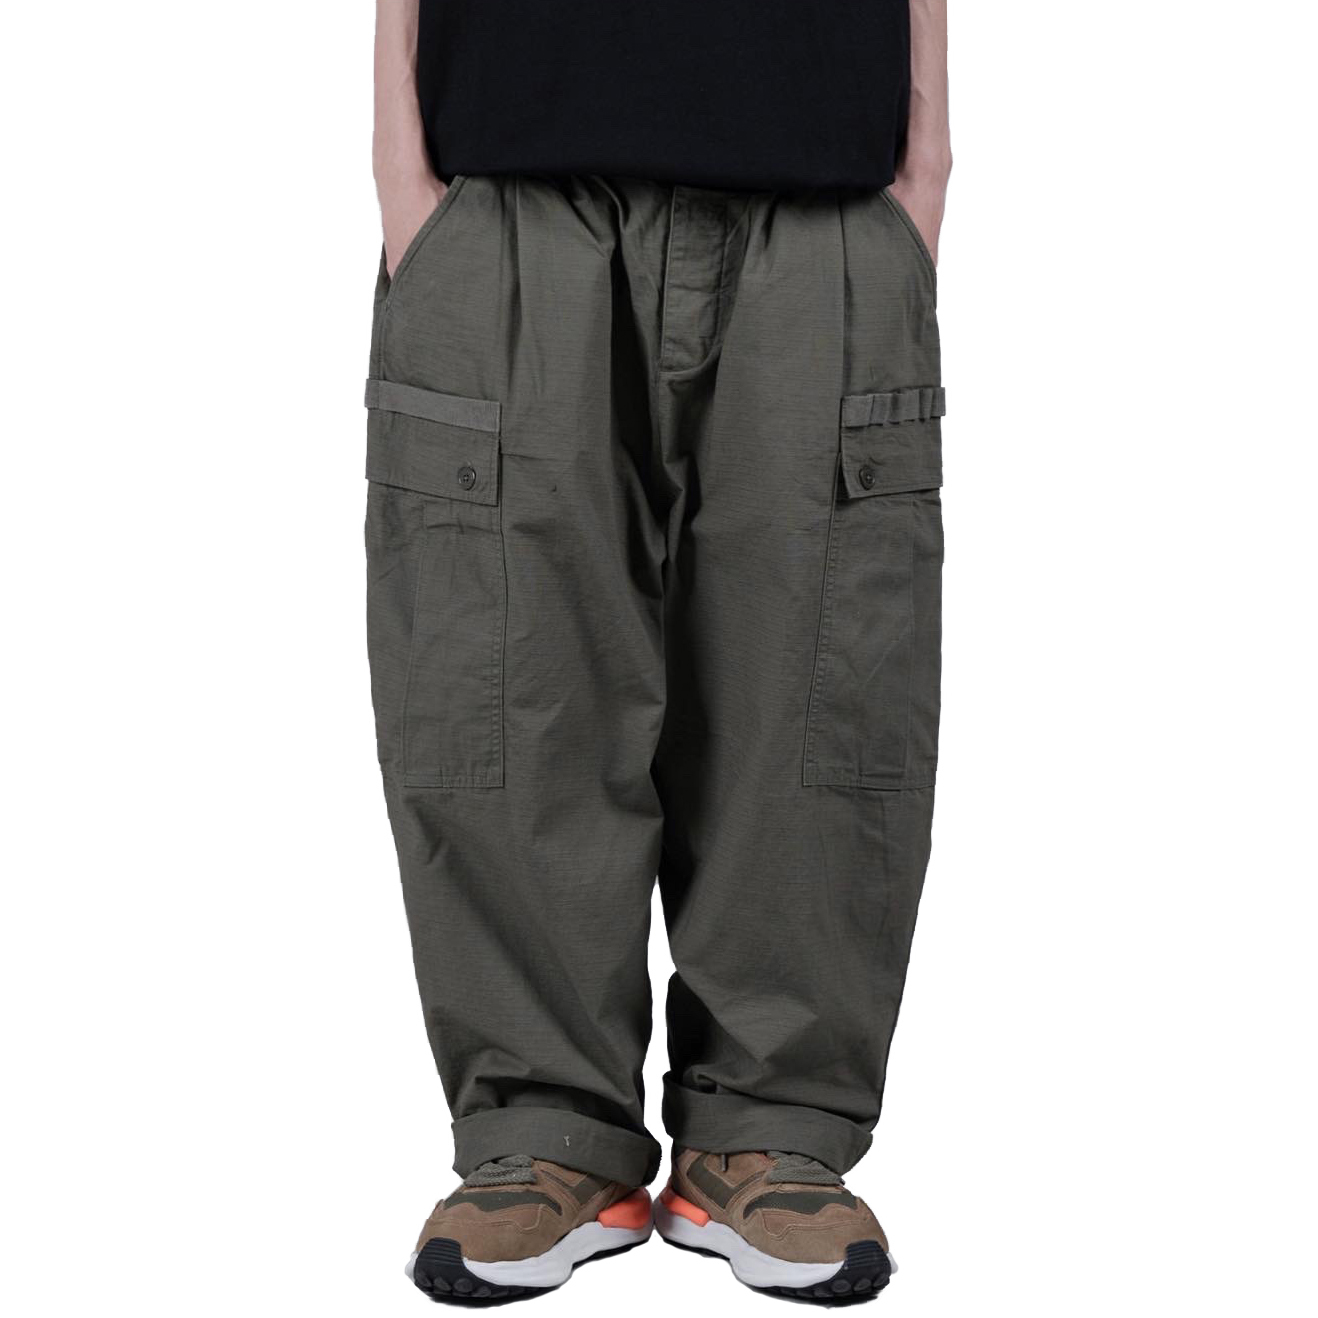 Workware - Daisy pants - Olive